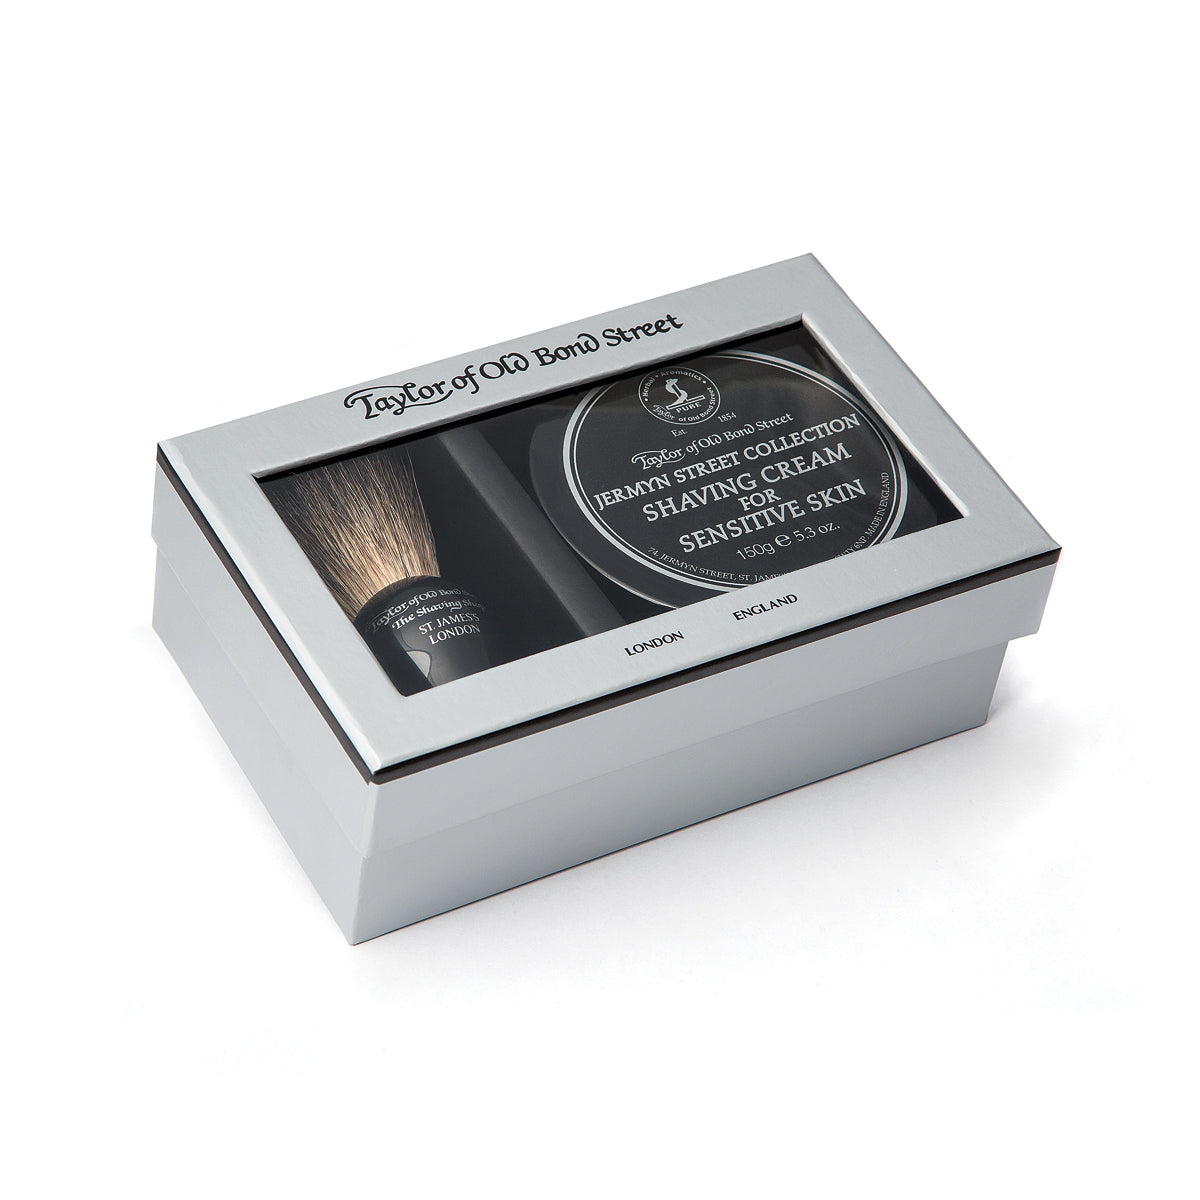 Taylor Taylor Street Old | Grooming - Bond Old | Sets Sets Bond Street of Grooming Gift